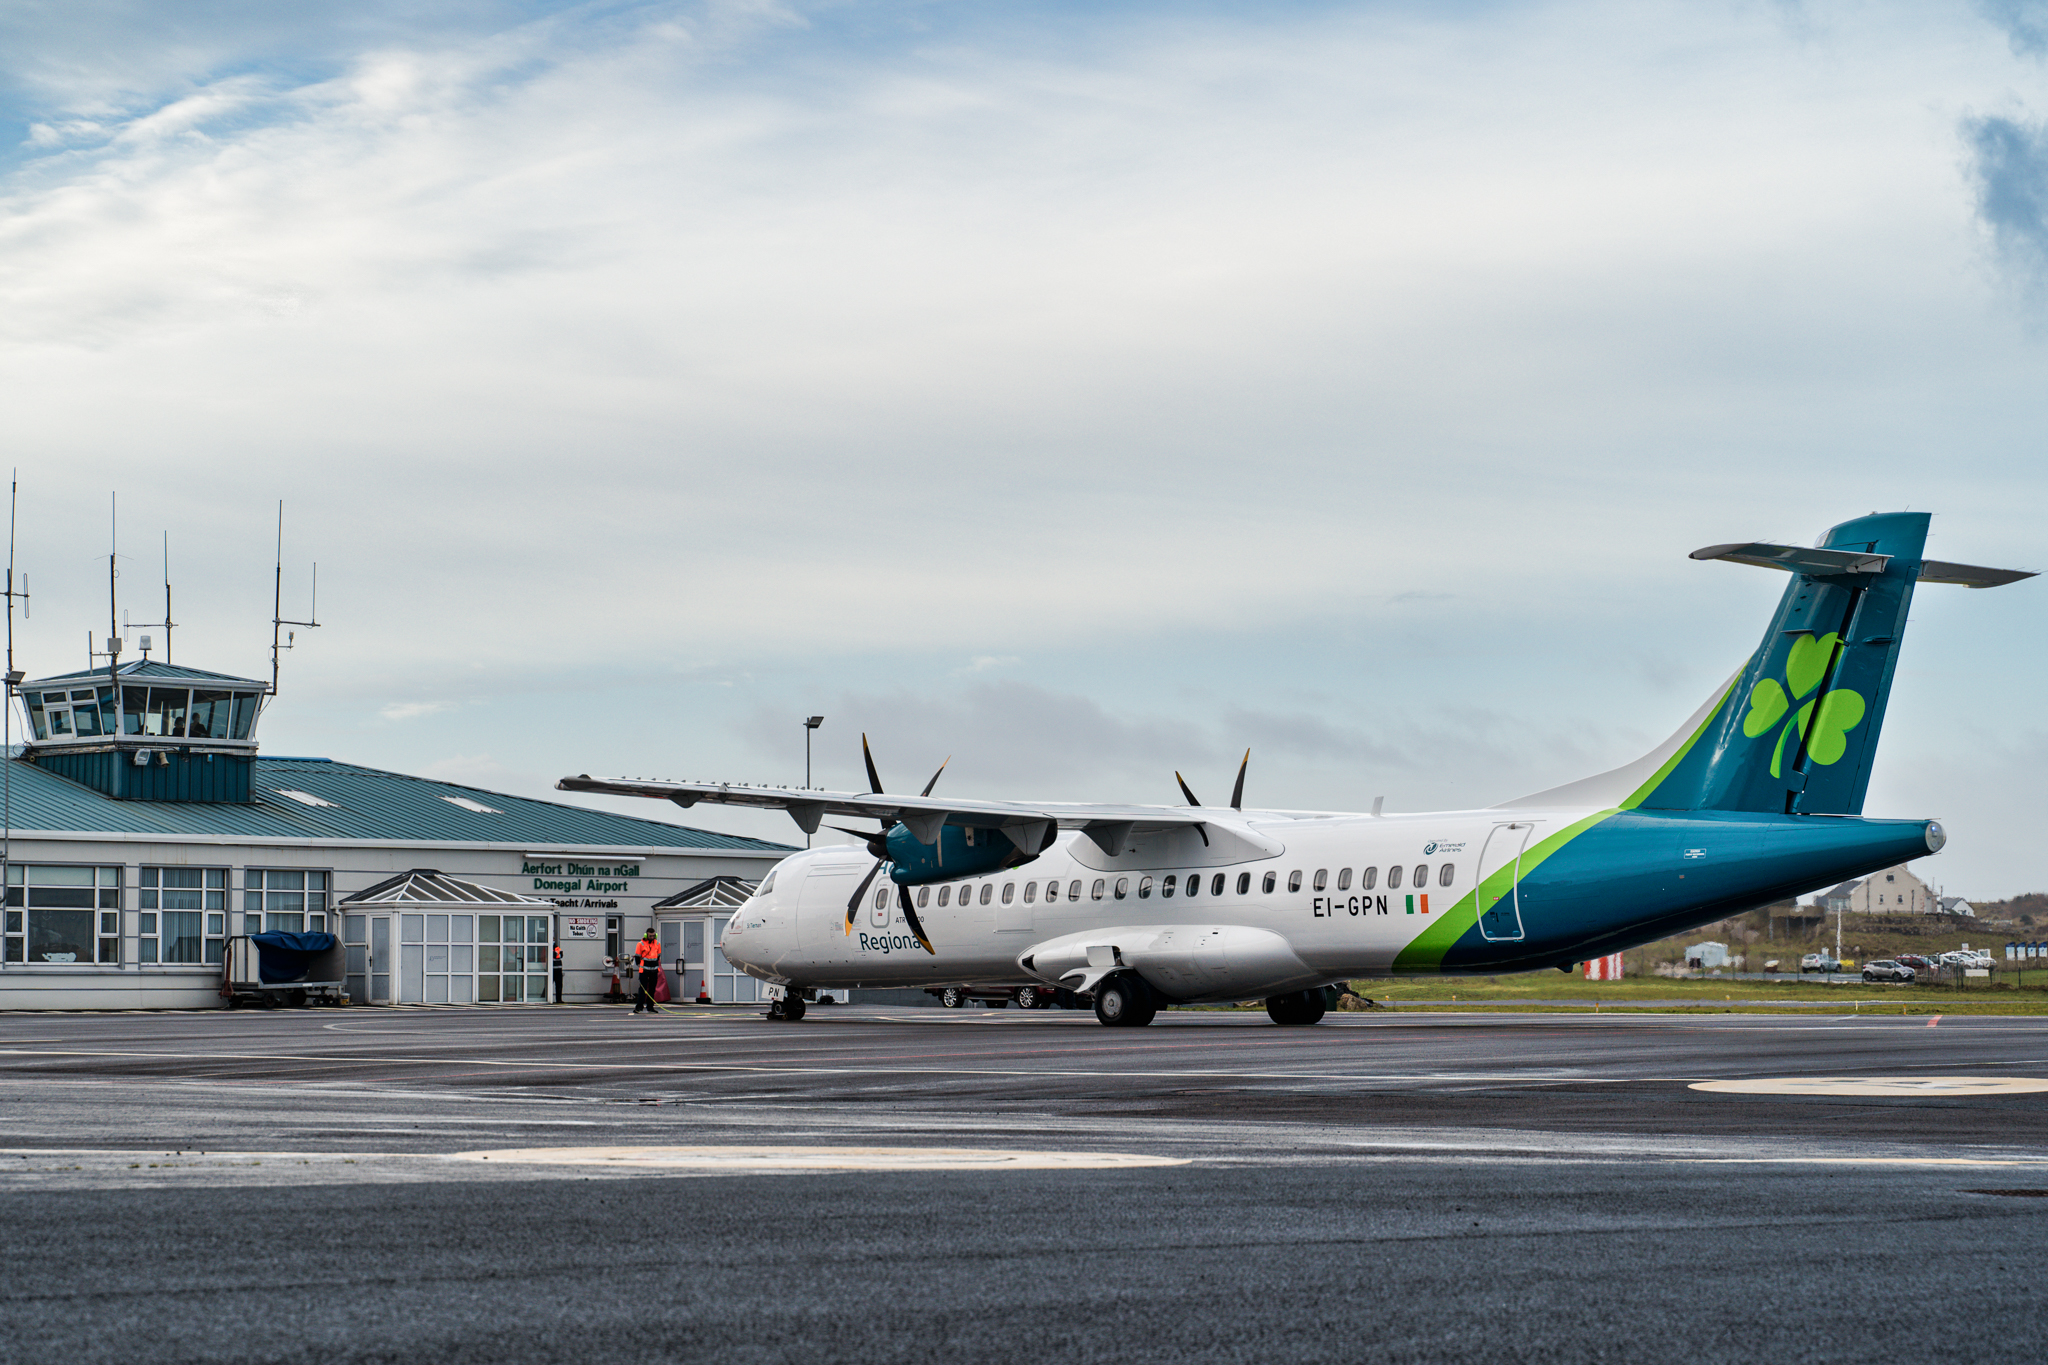 ATR-72 aircraft on Donegal Airport apron with Aer Lingus logo on the tail and the airport terminal in the background